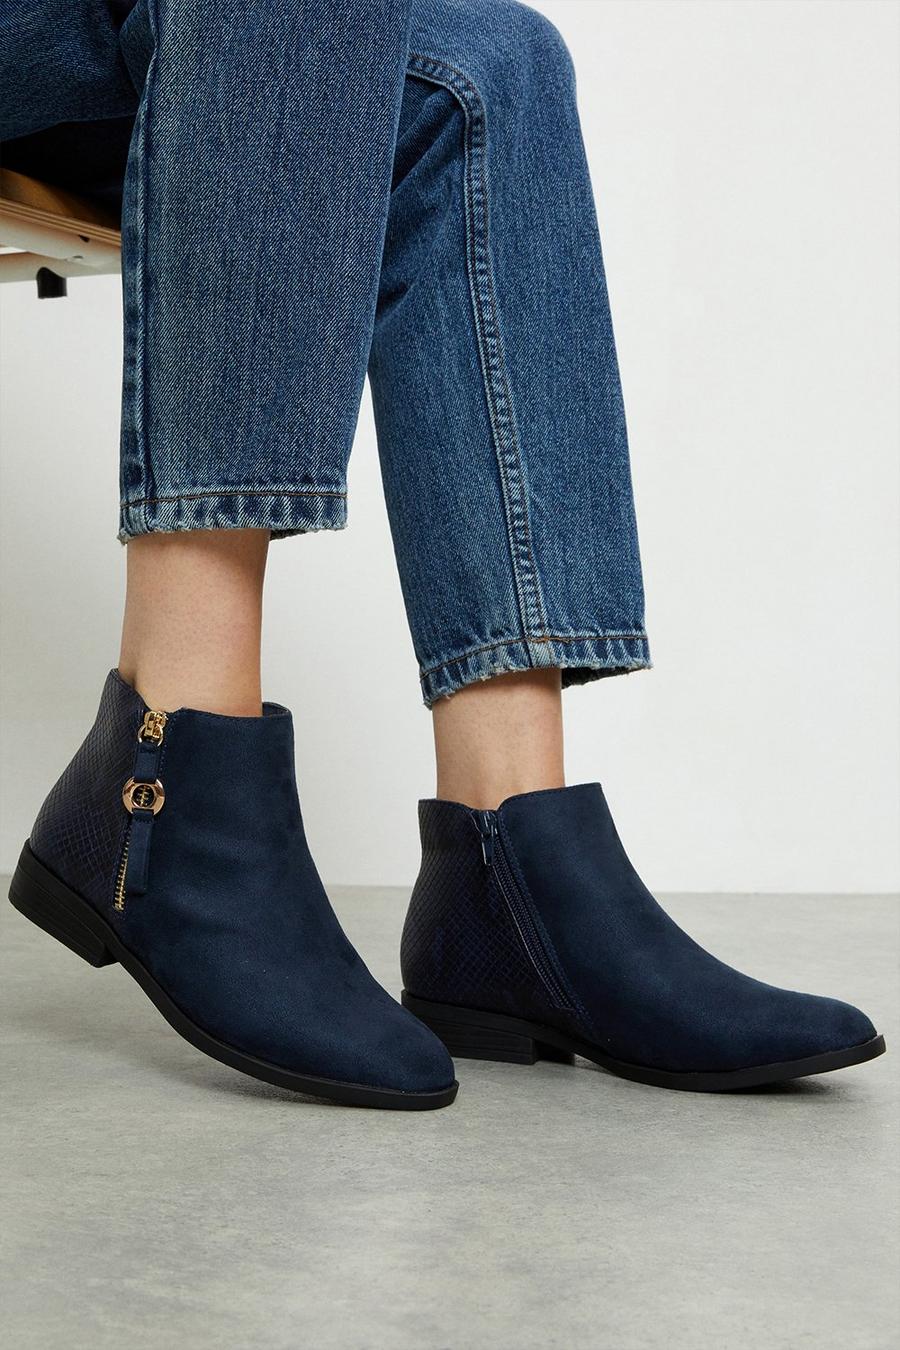 Good For The Sole: Mabel Comfort Snake Back Ankle Boots